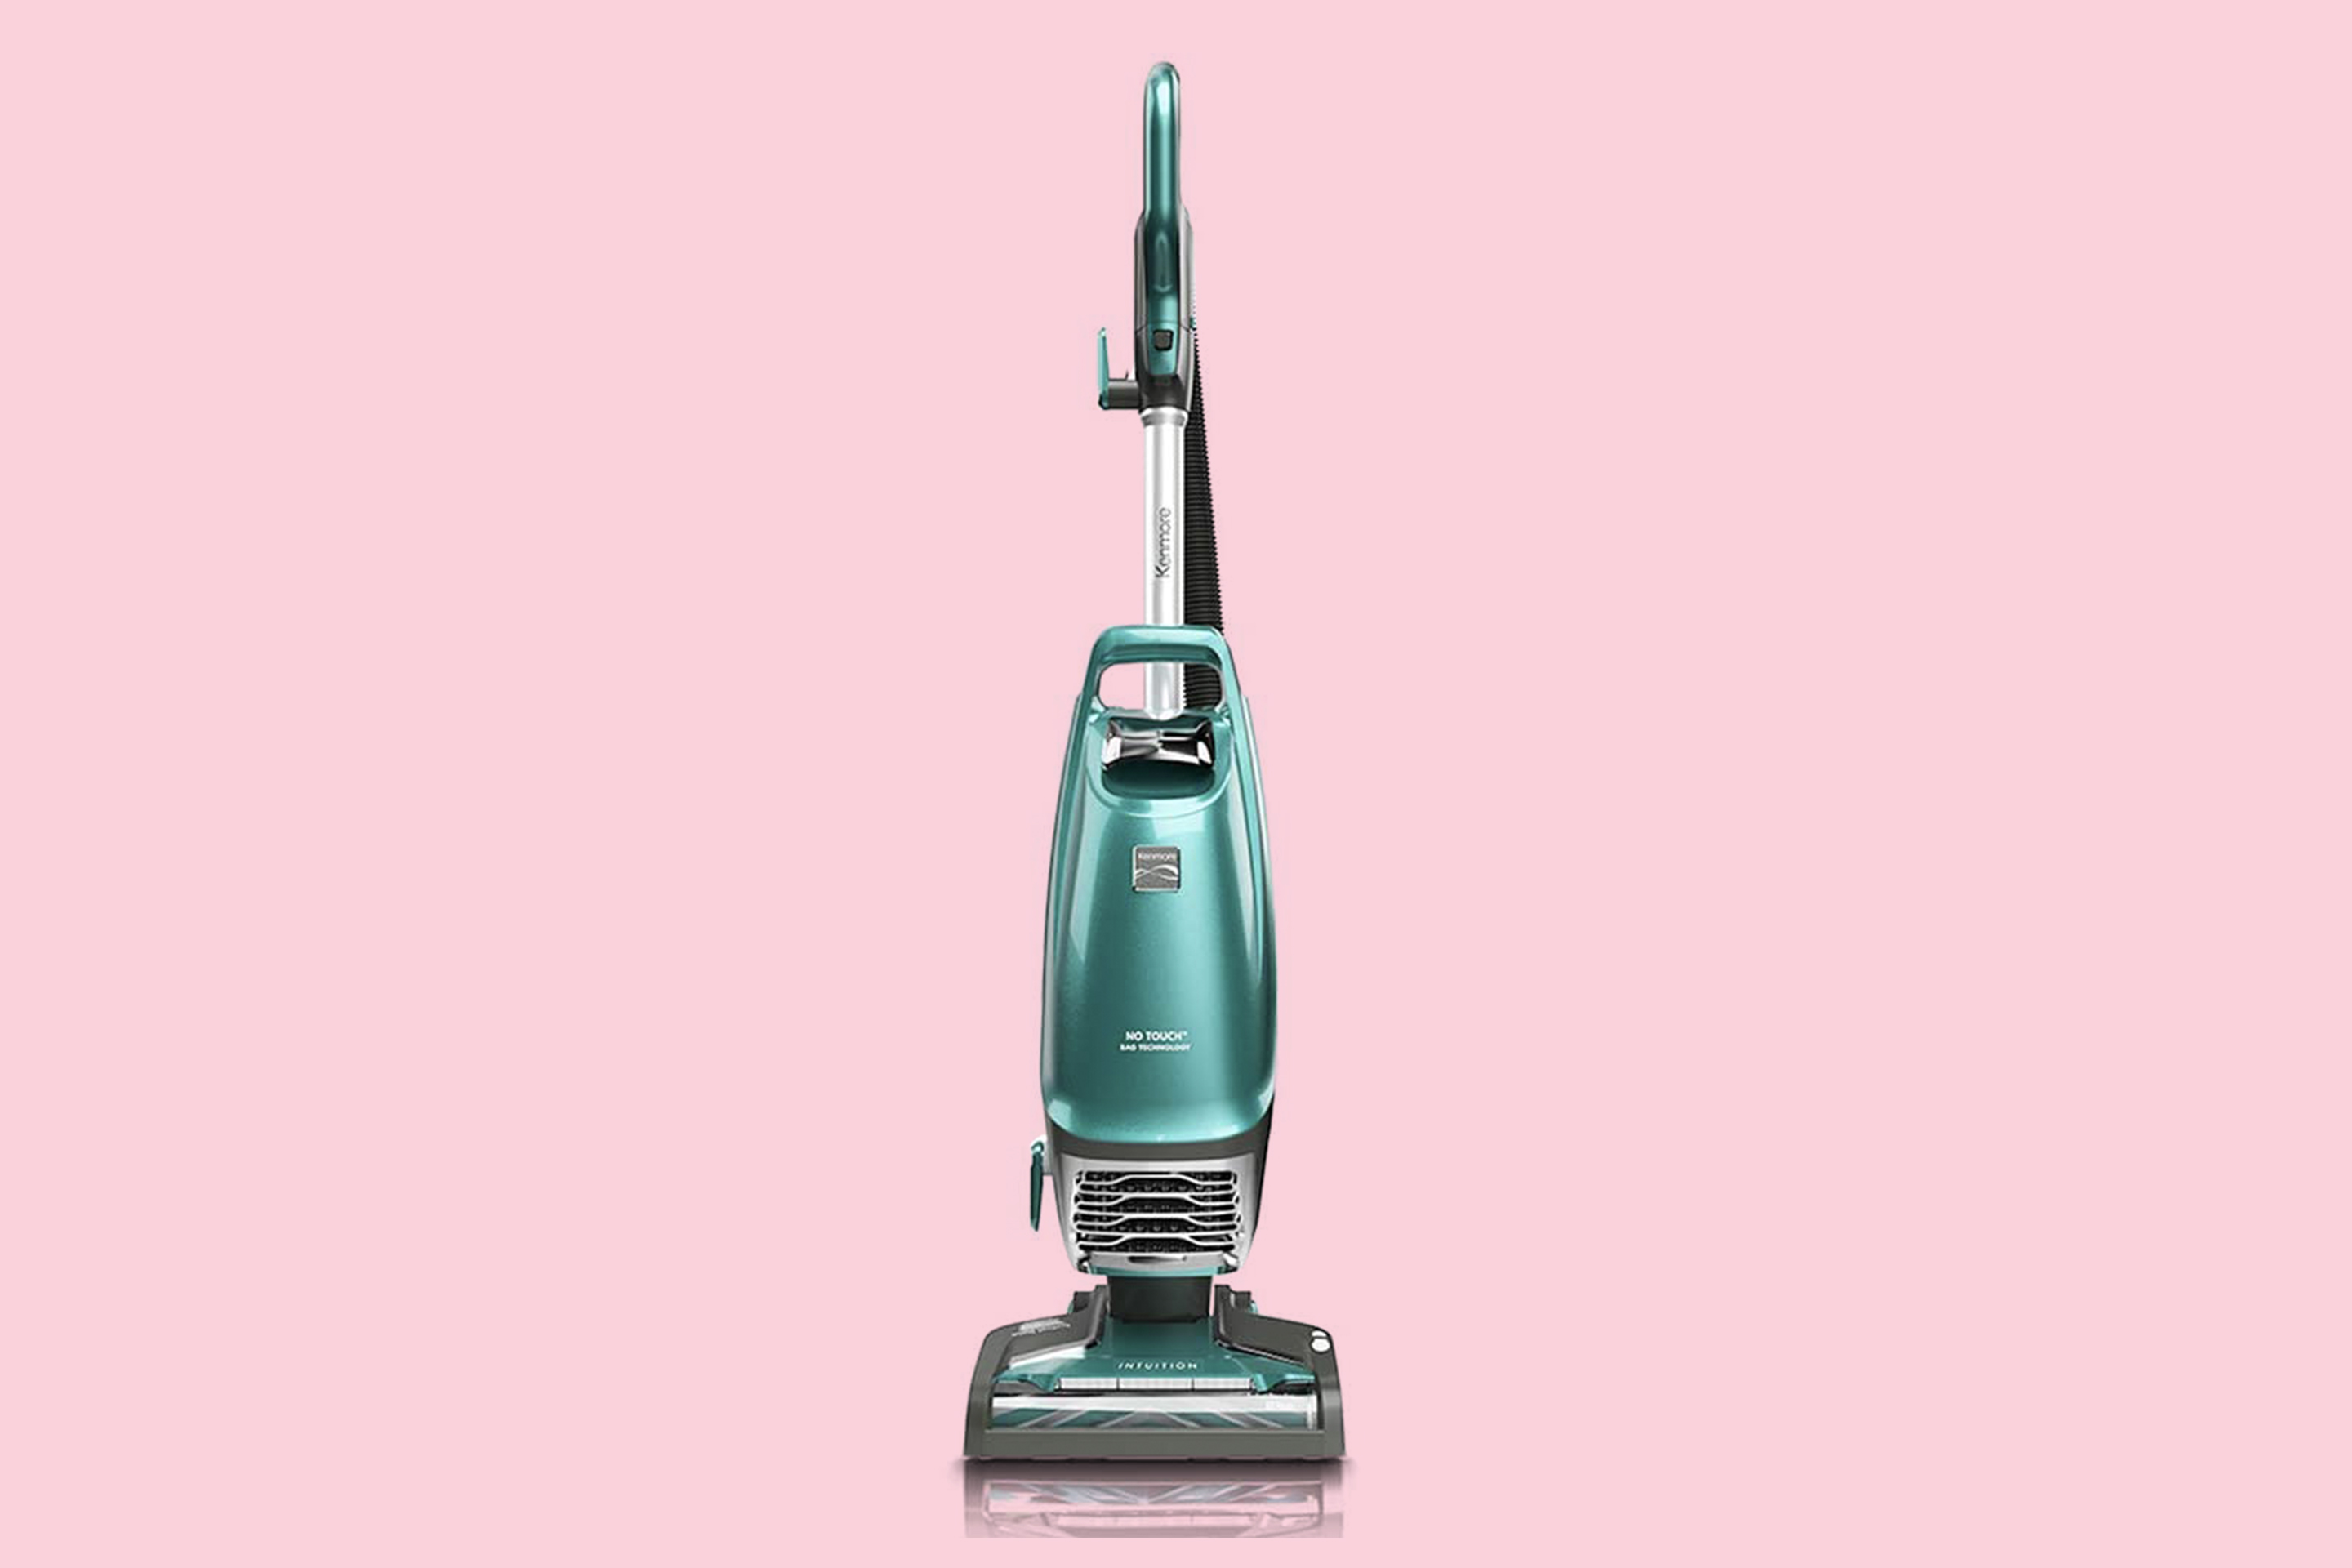 Kenmore Intuition BU4022 Bagged Upright Vacuum